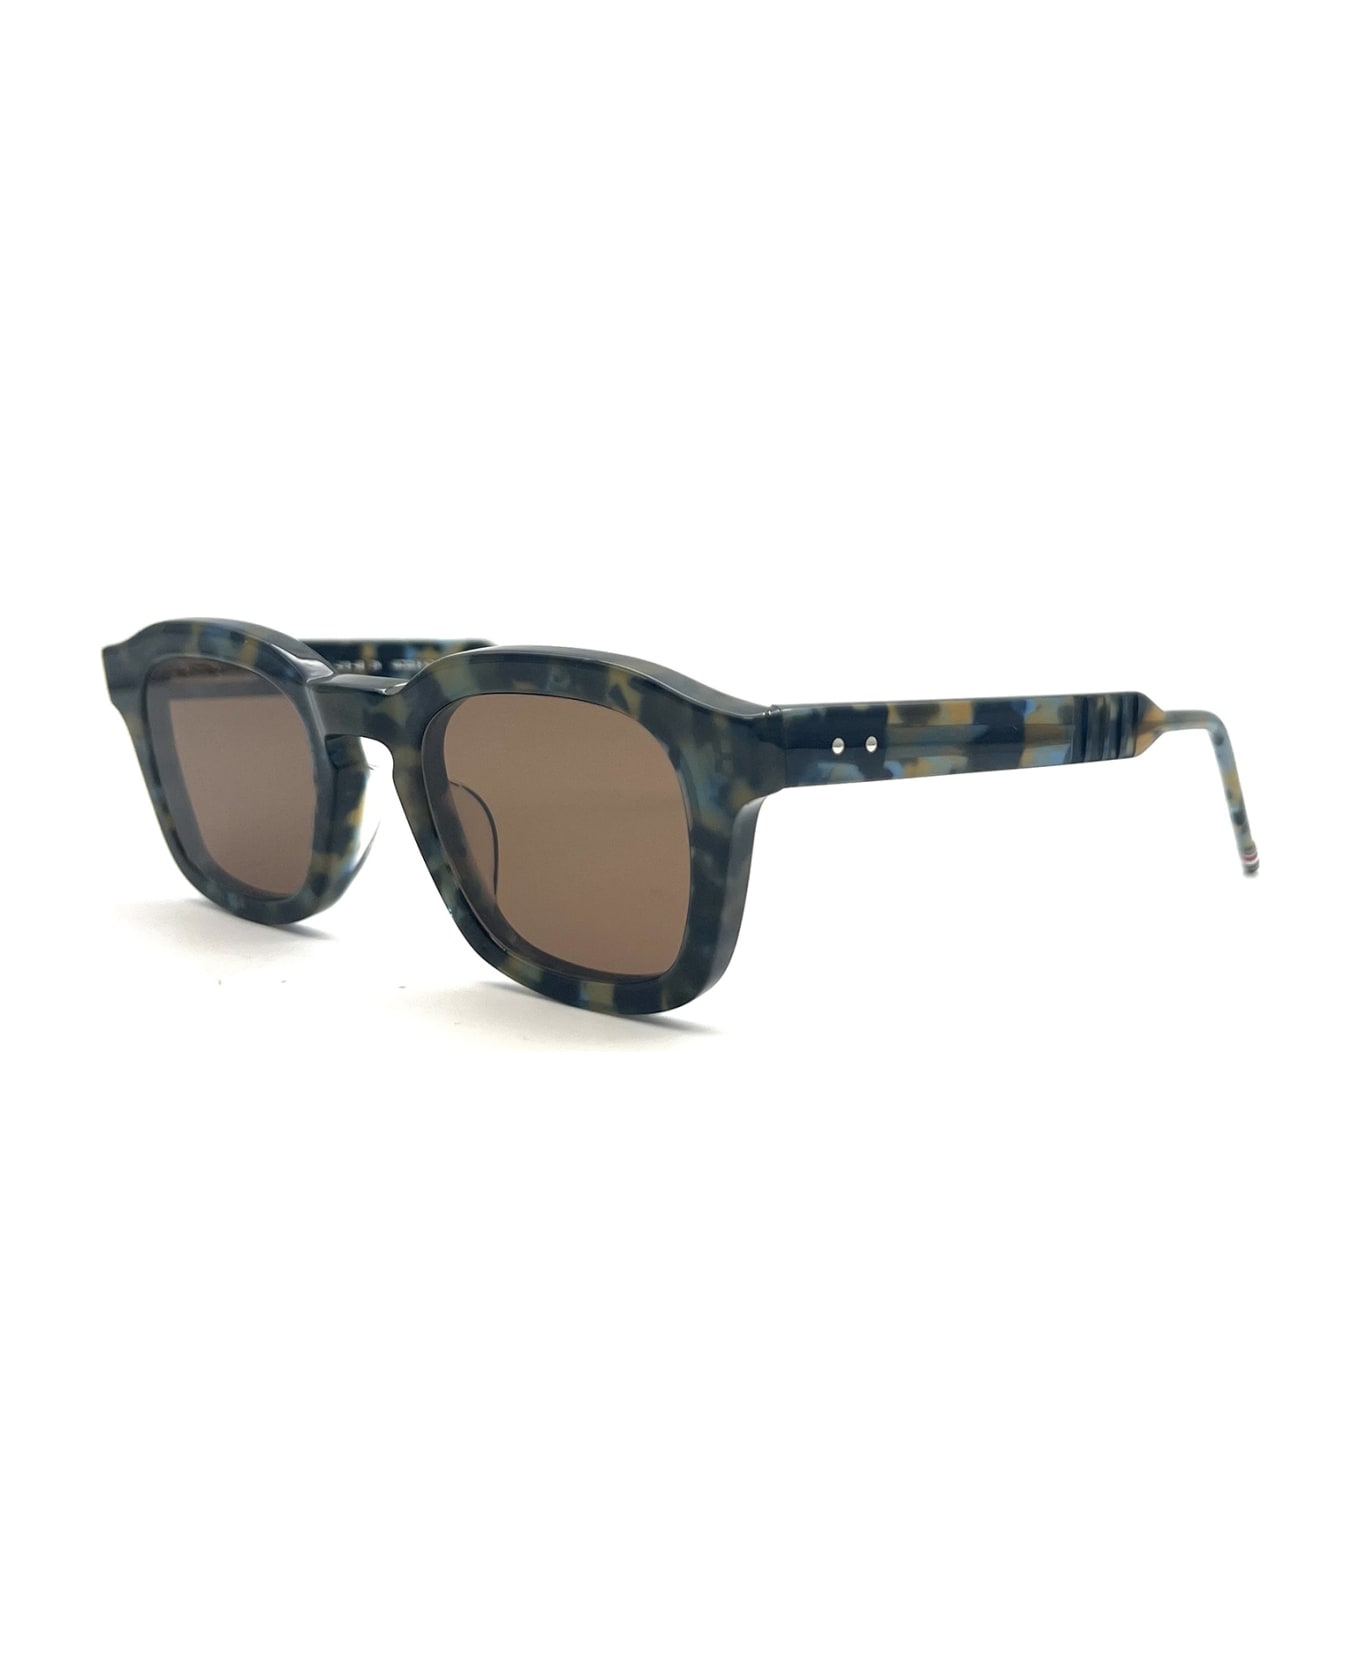 Thom Browne Ues412a/g0002 Sunglasses - navy blue サングラス